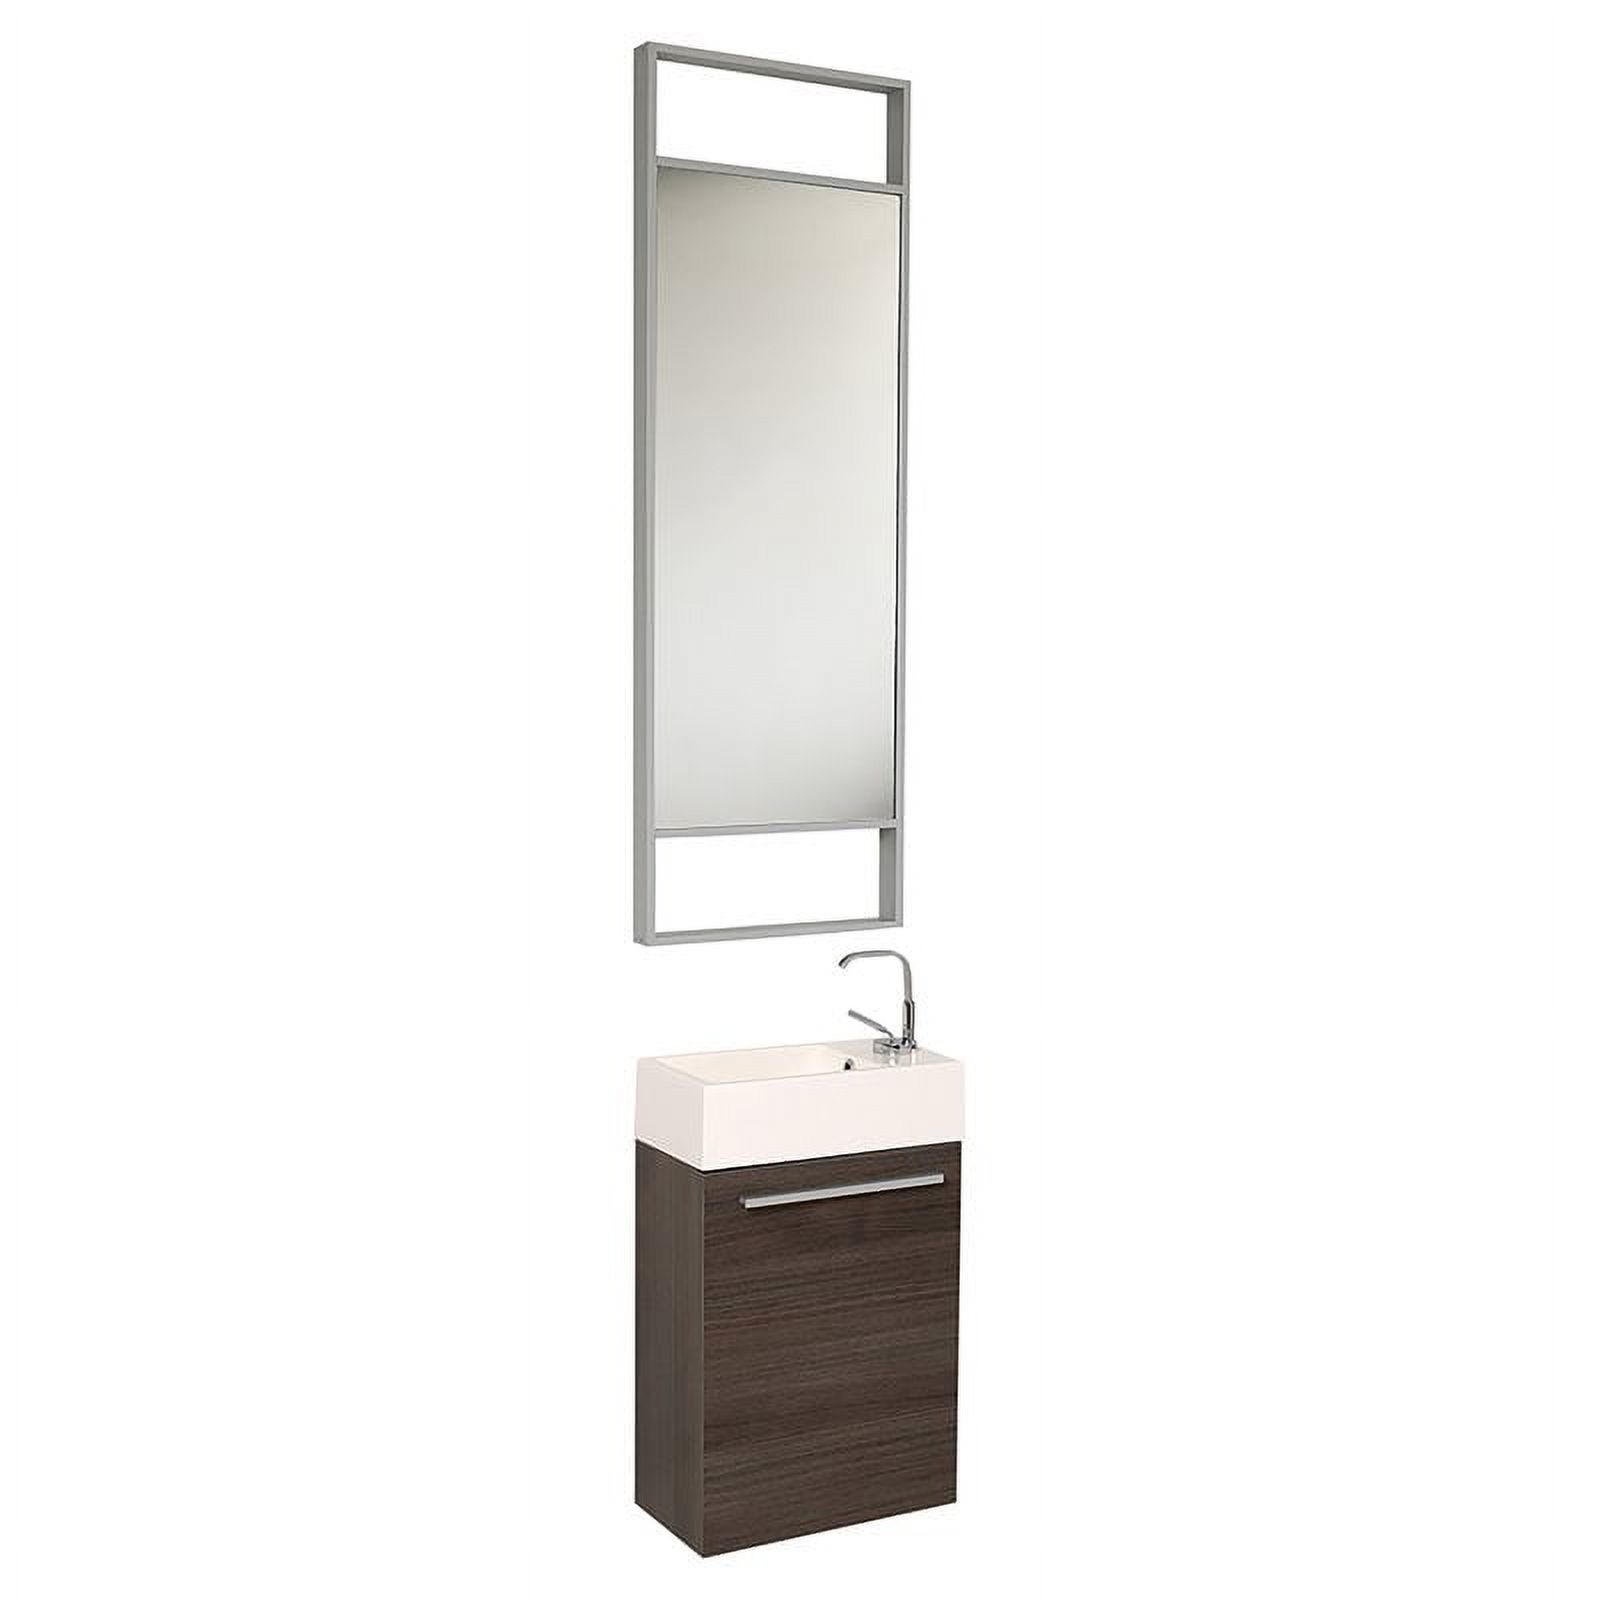 Pulito Small Modern Bathroom Vanity with Tall Mirror - image 1 of 7